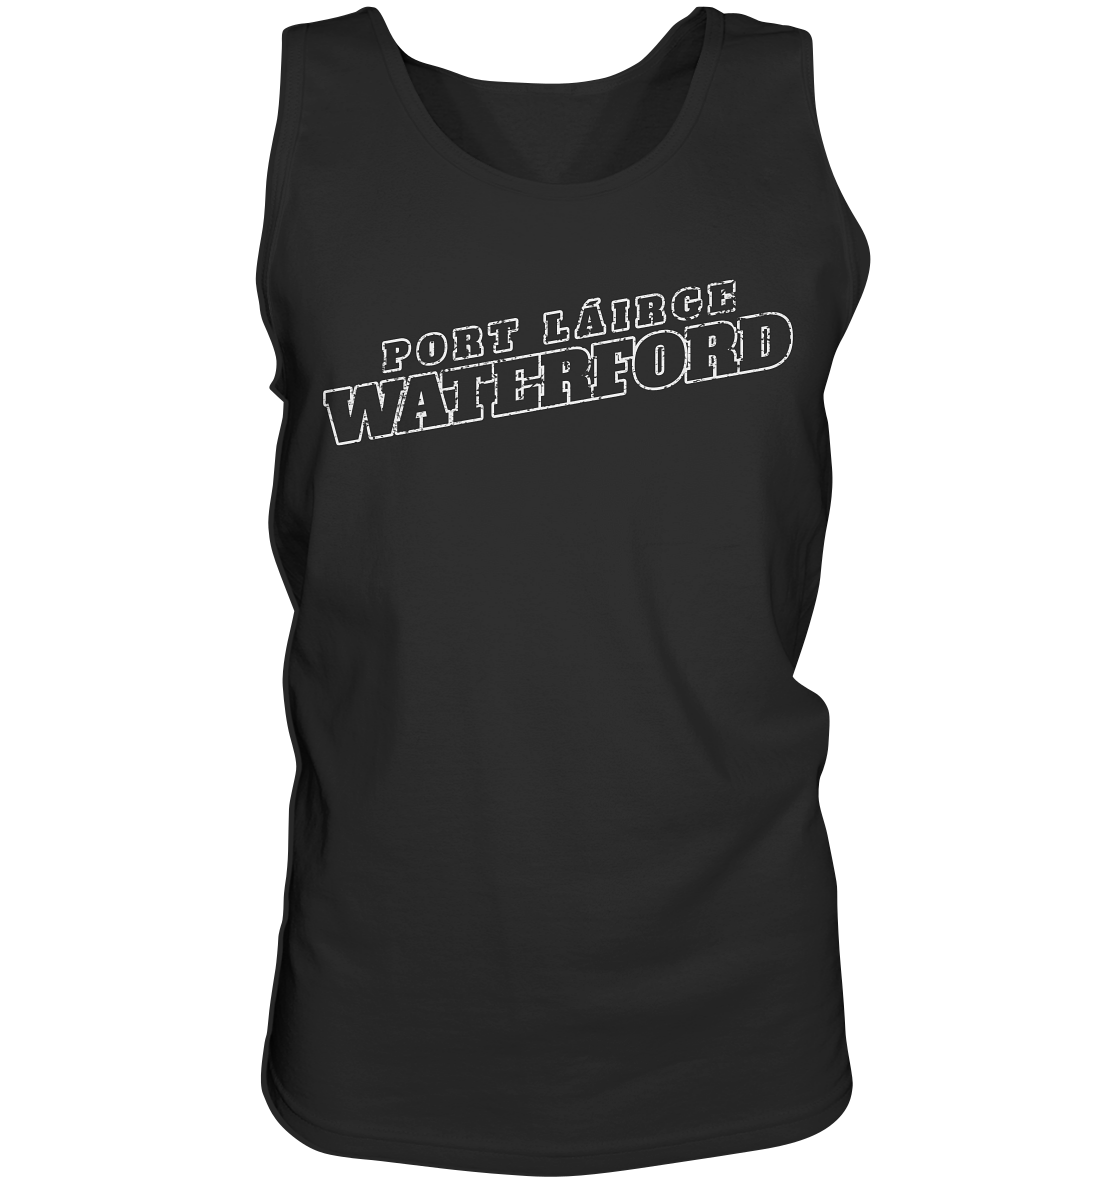 Cities Of Ireland "Waterford" - Tank-Top